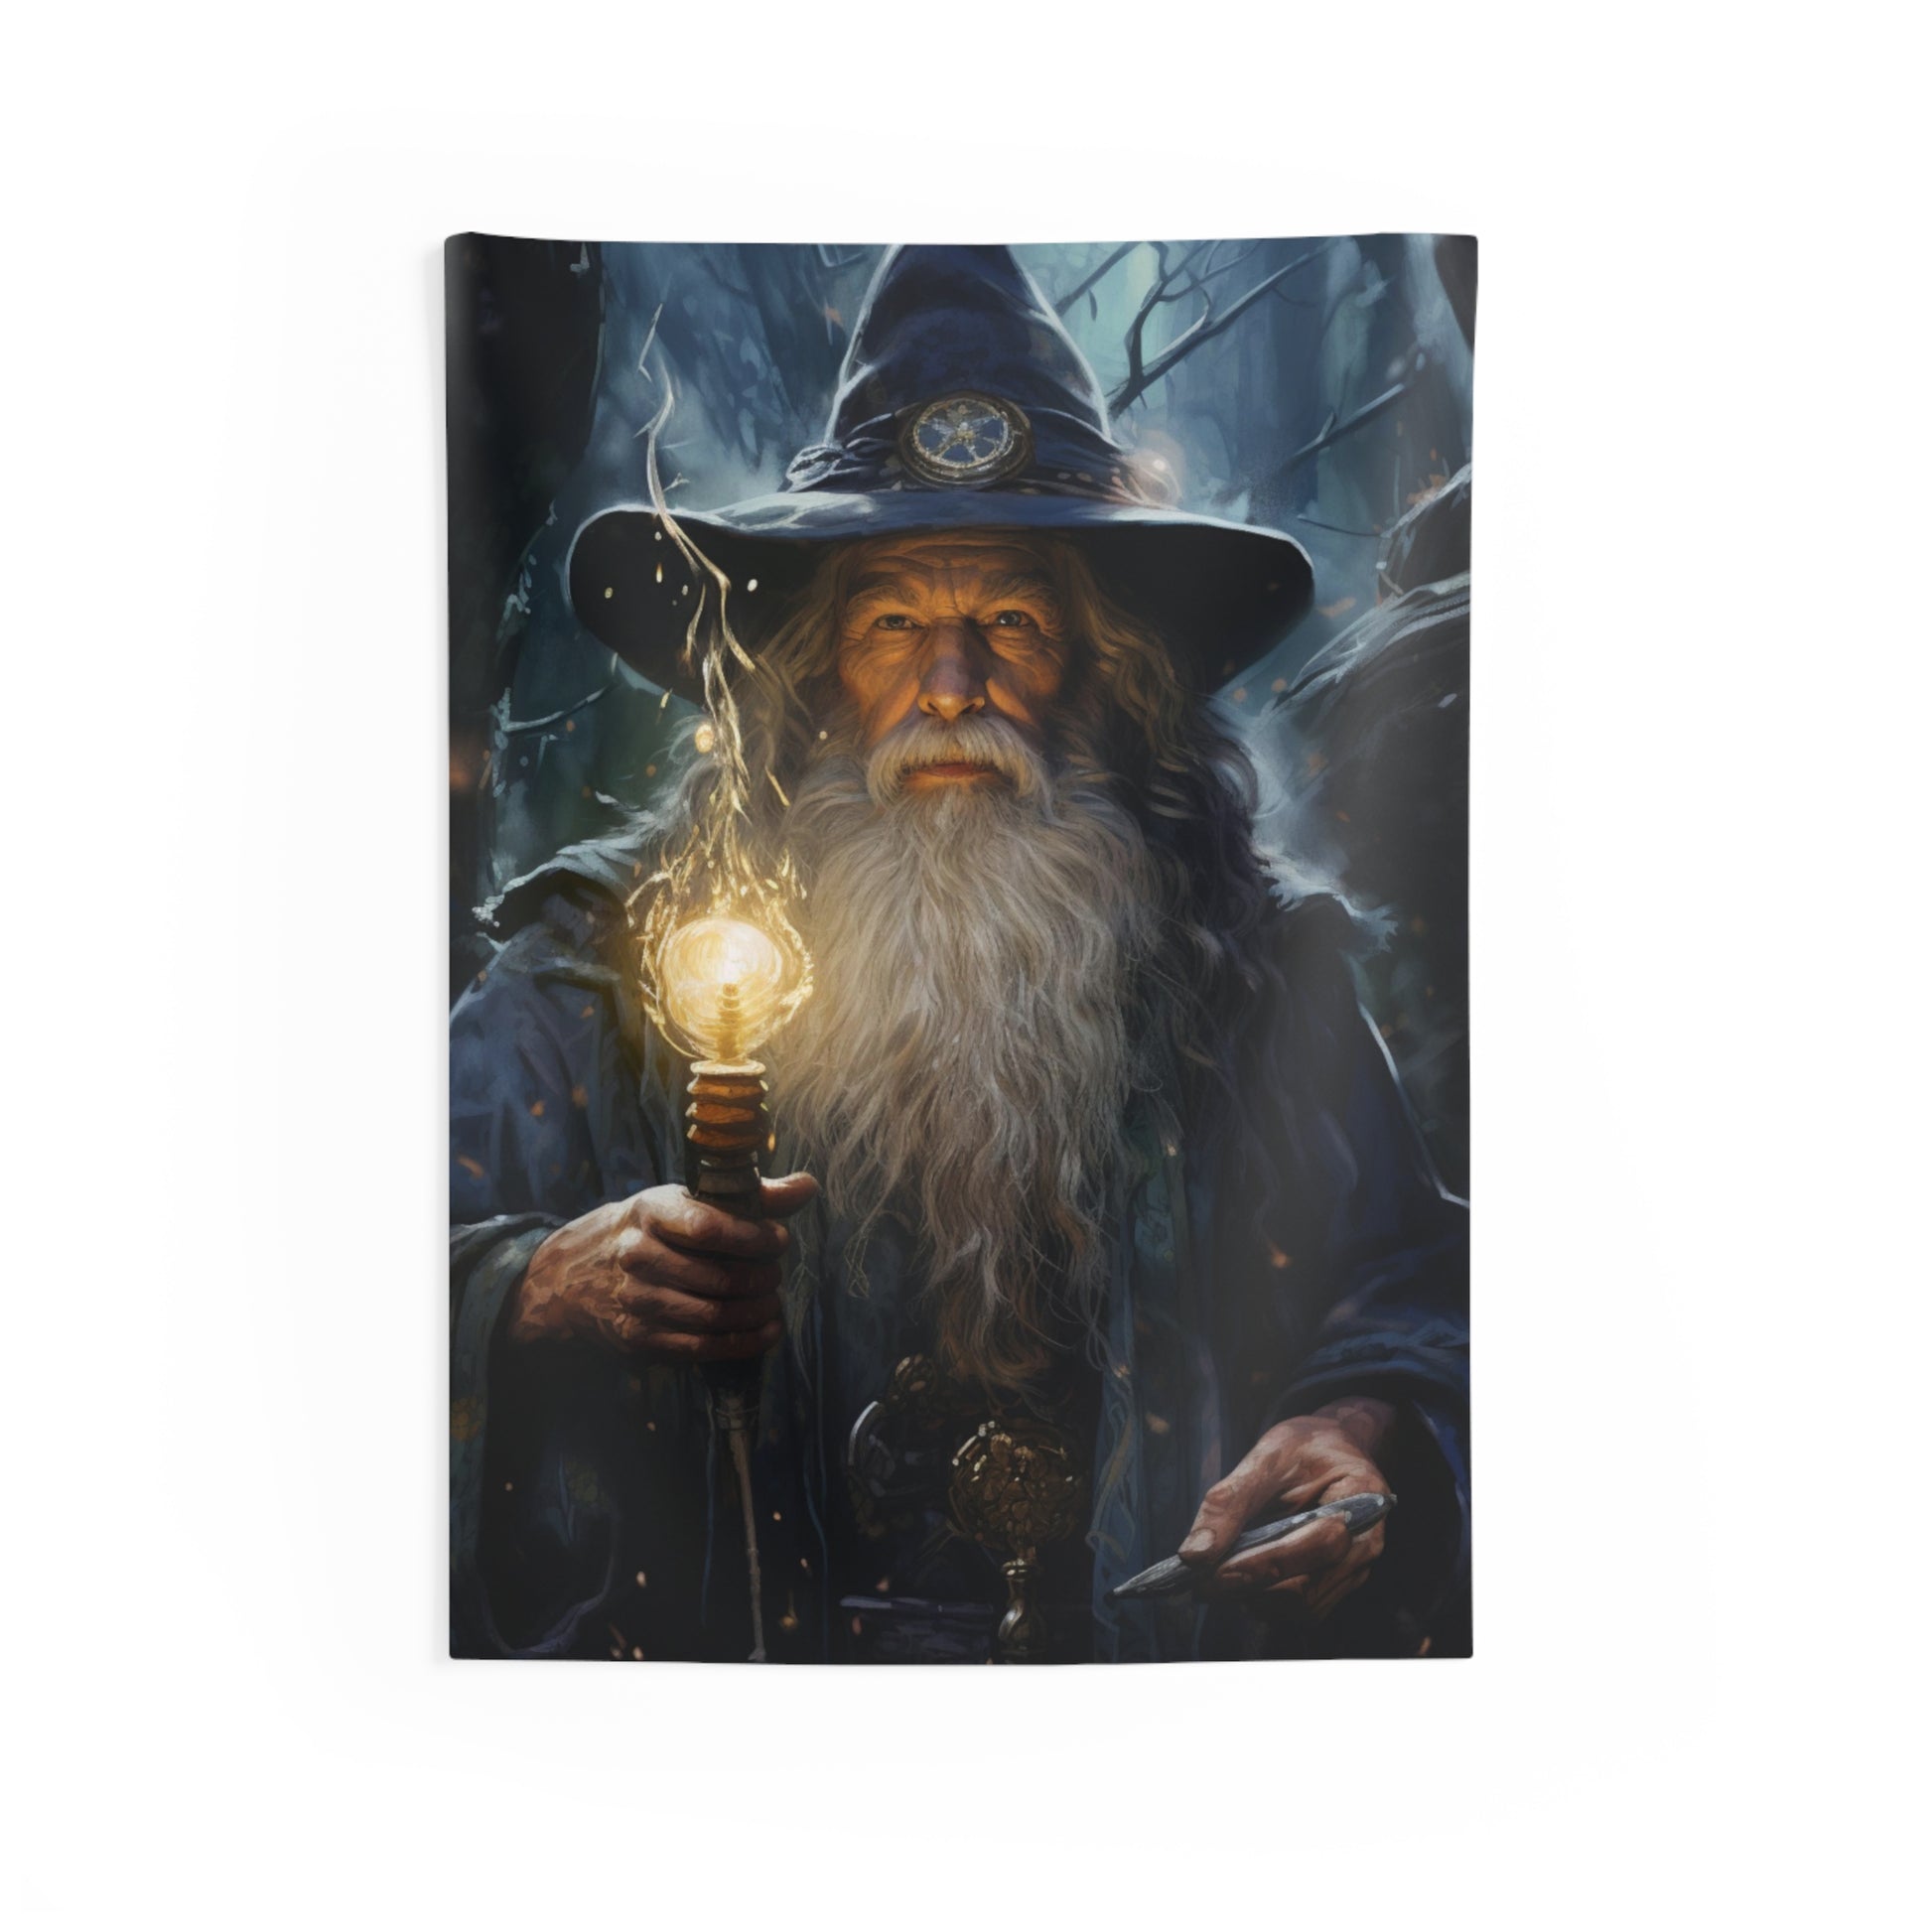 Wizard Tapestry, Mage Magic Wall Art Hanging Cool Unique Vertical Aesthetic Large Small Decor Bedroom College Dorm Room Starcove Fashion